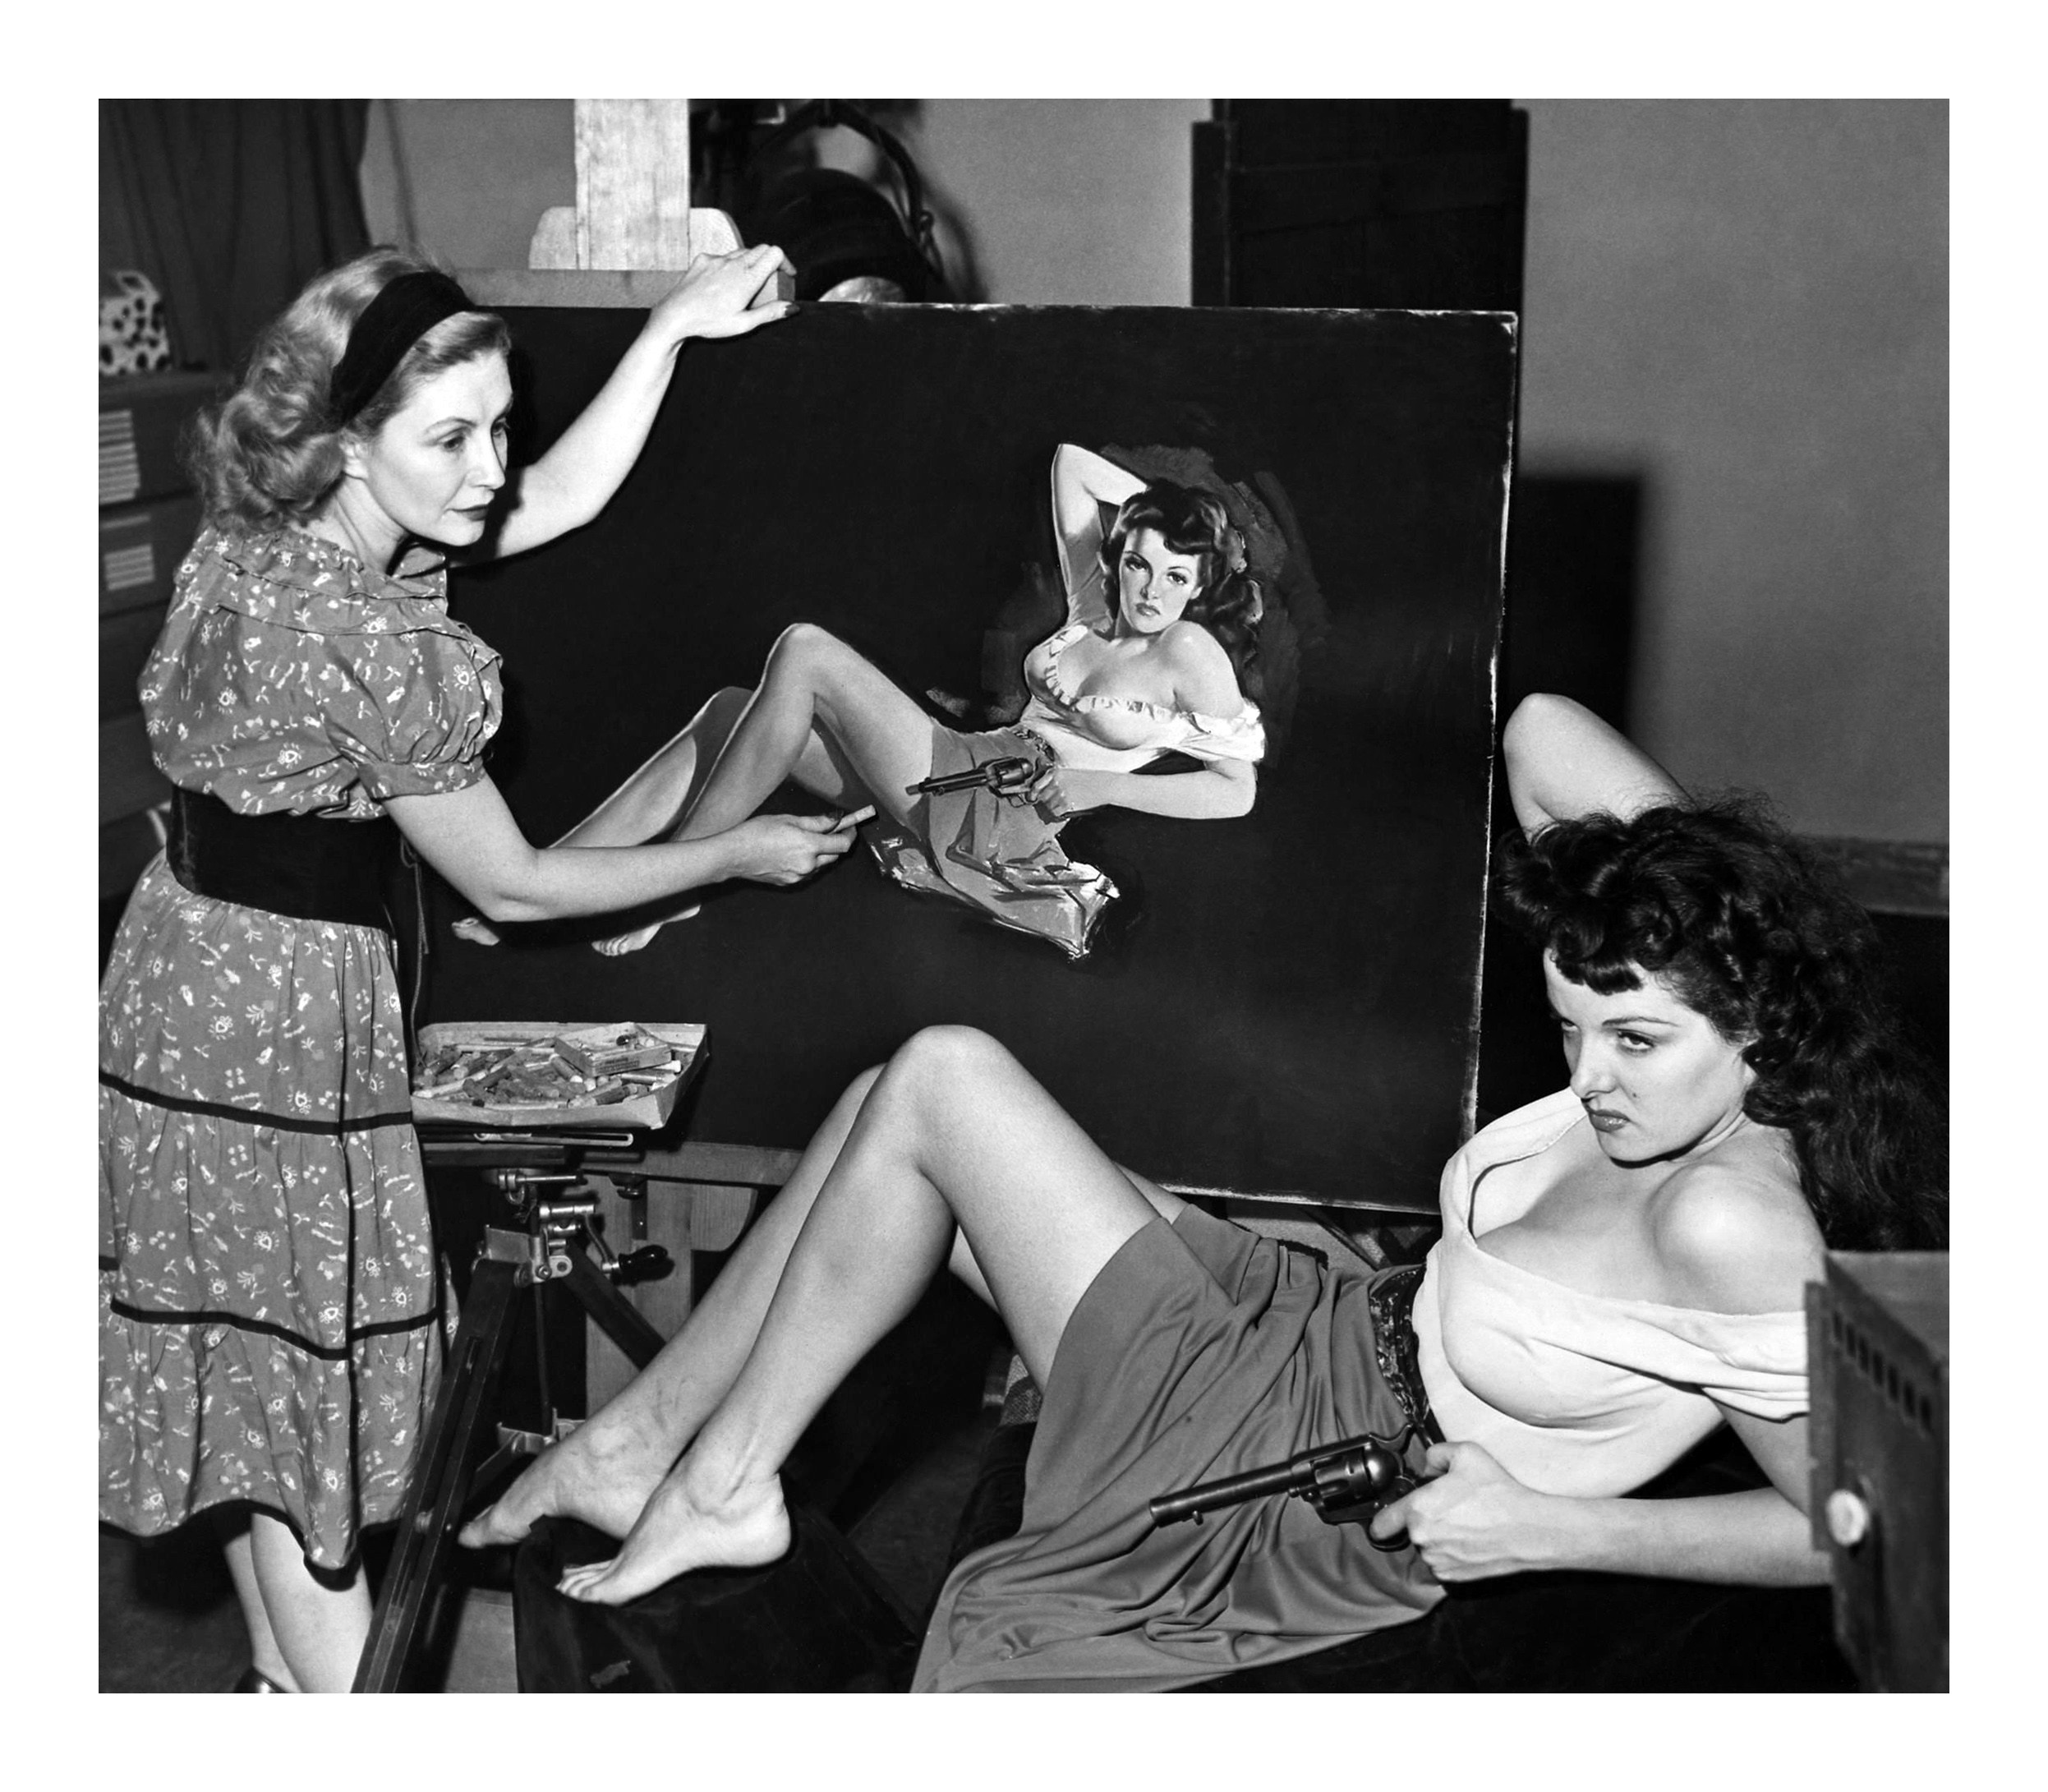 Burlyqnell - Vintage Photos of Burlesque Dancers - Community | Facebook